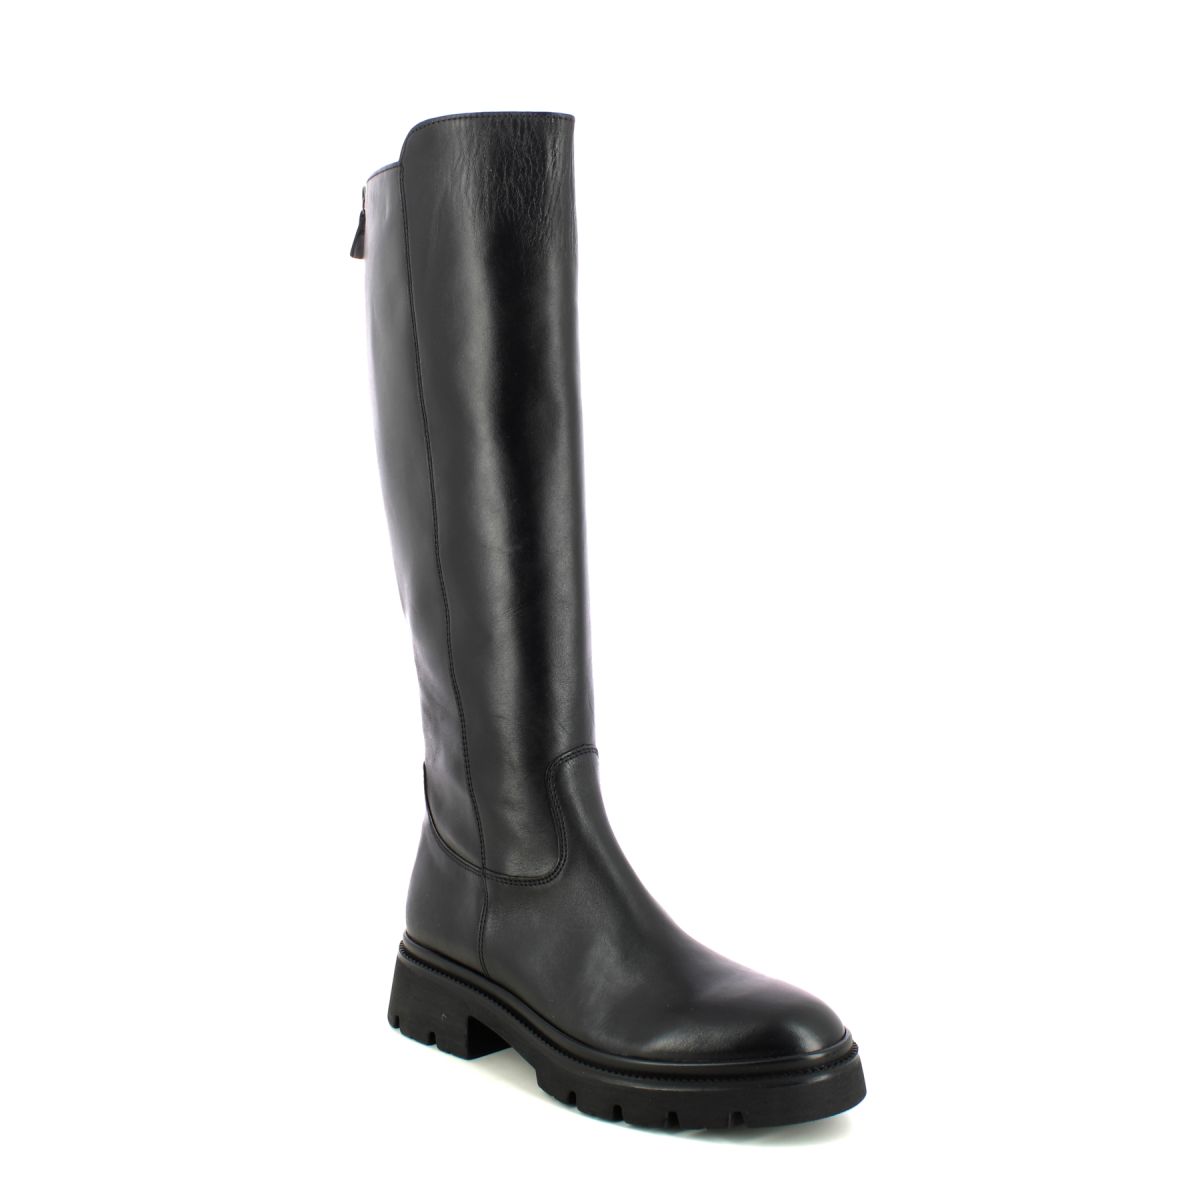 Gabor Match Medium Leg Black leather Womens knee-high boots 31.859.27 in a Plain Leather in Size 5.5